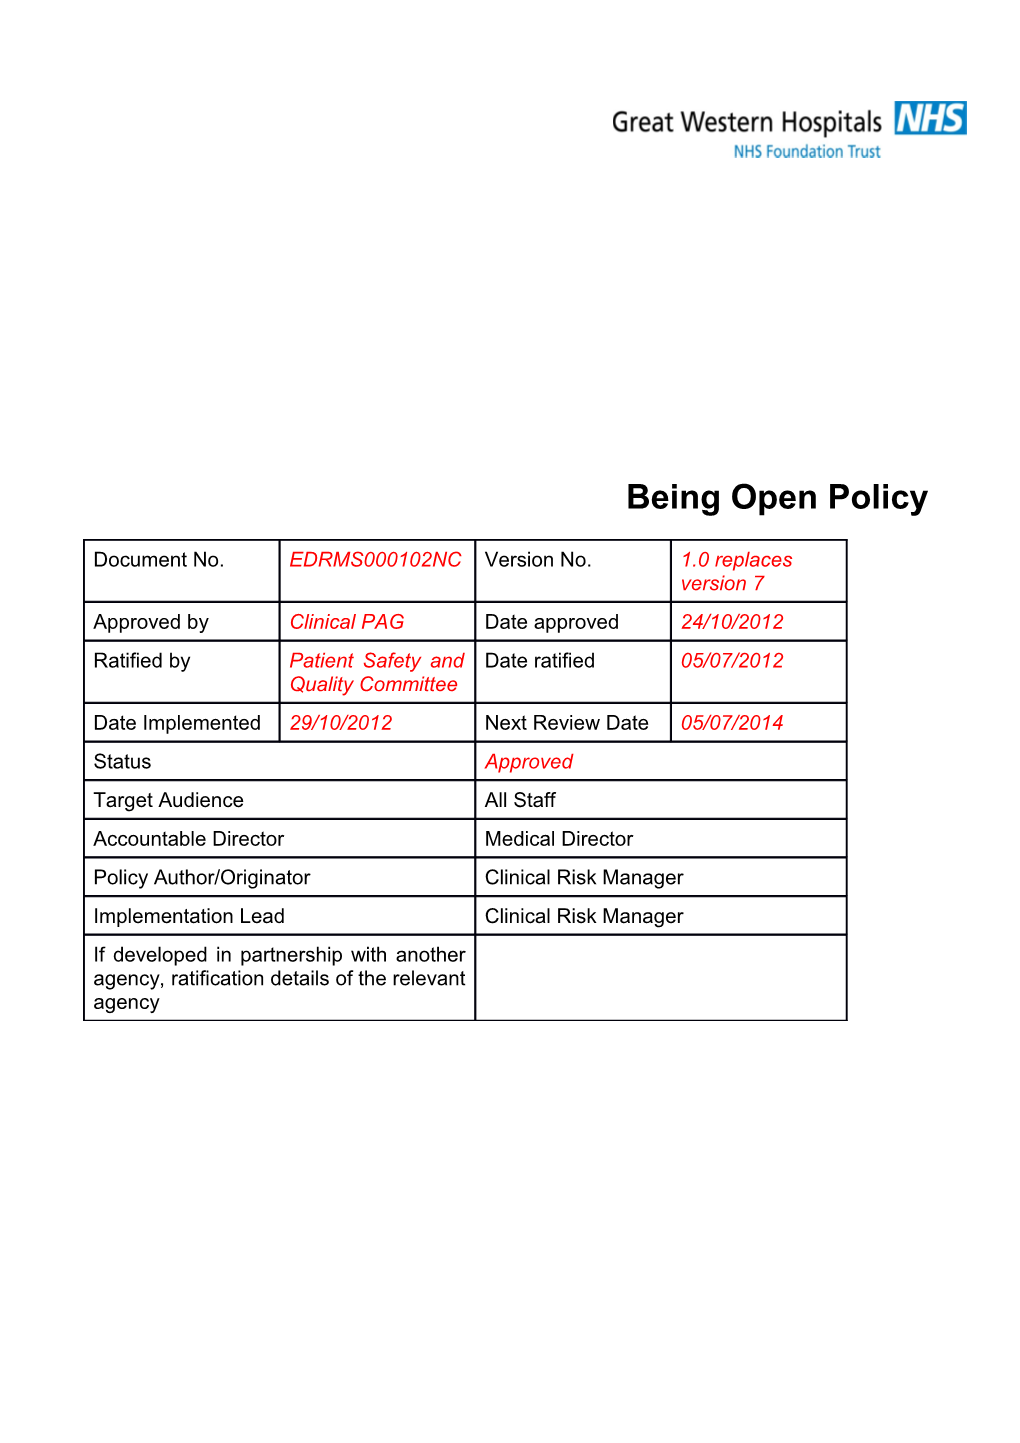 Being Open Policy